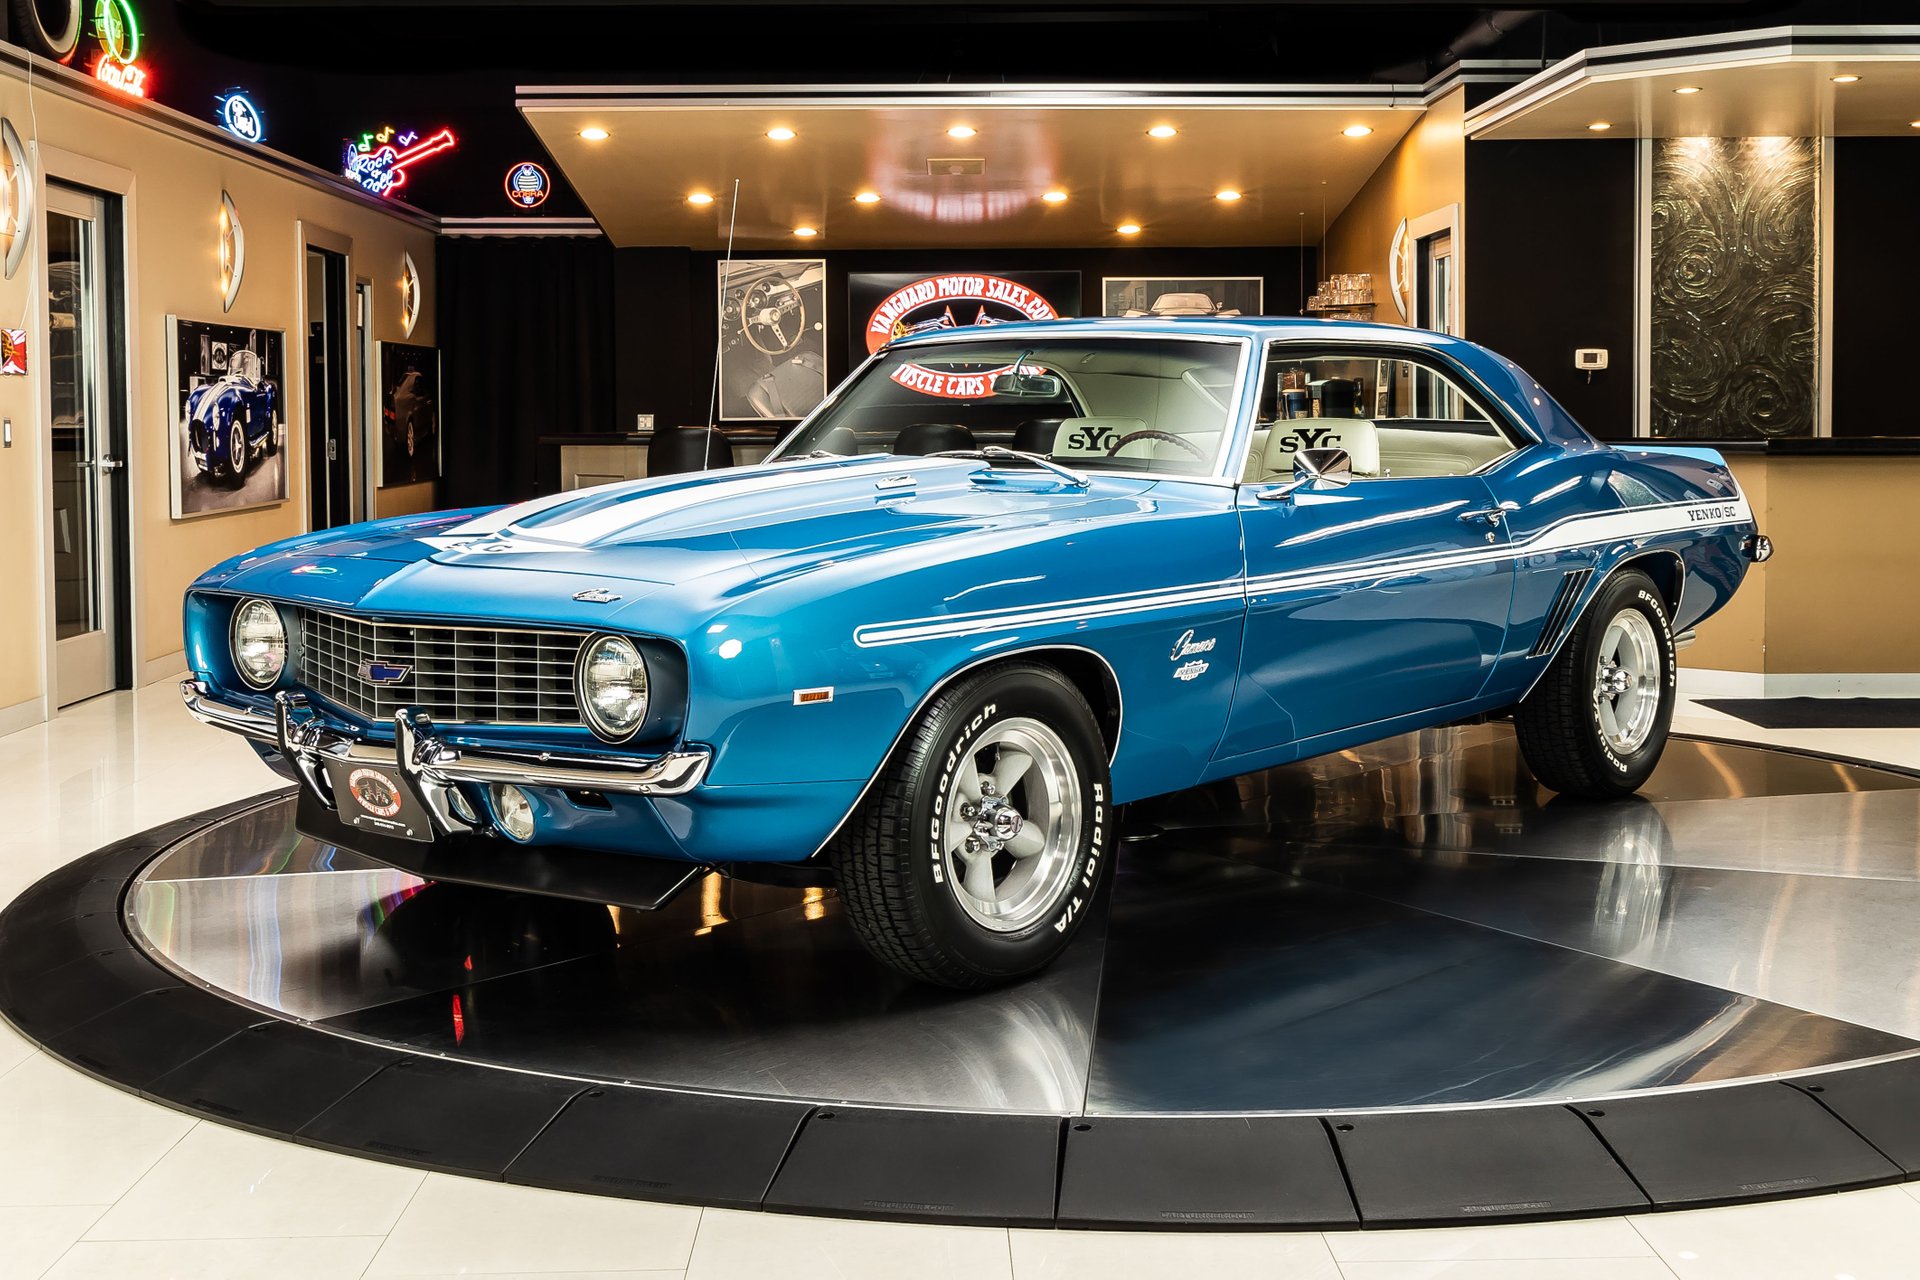 1969 Chevrolet Camaro | Classic Cars for Sale Michigan: Muscle & Old Cars |  Vanguard Motor Sales